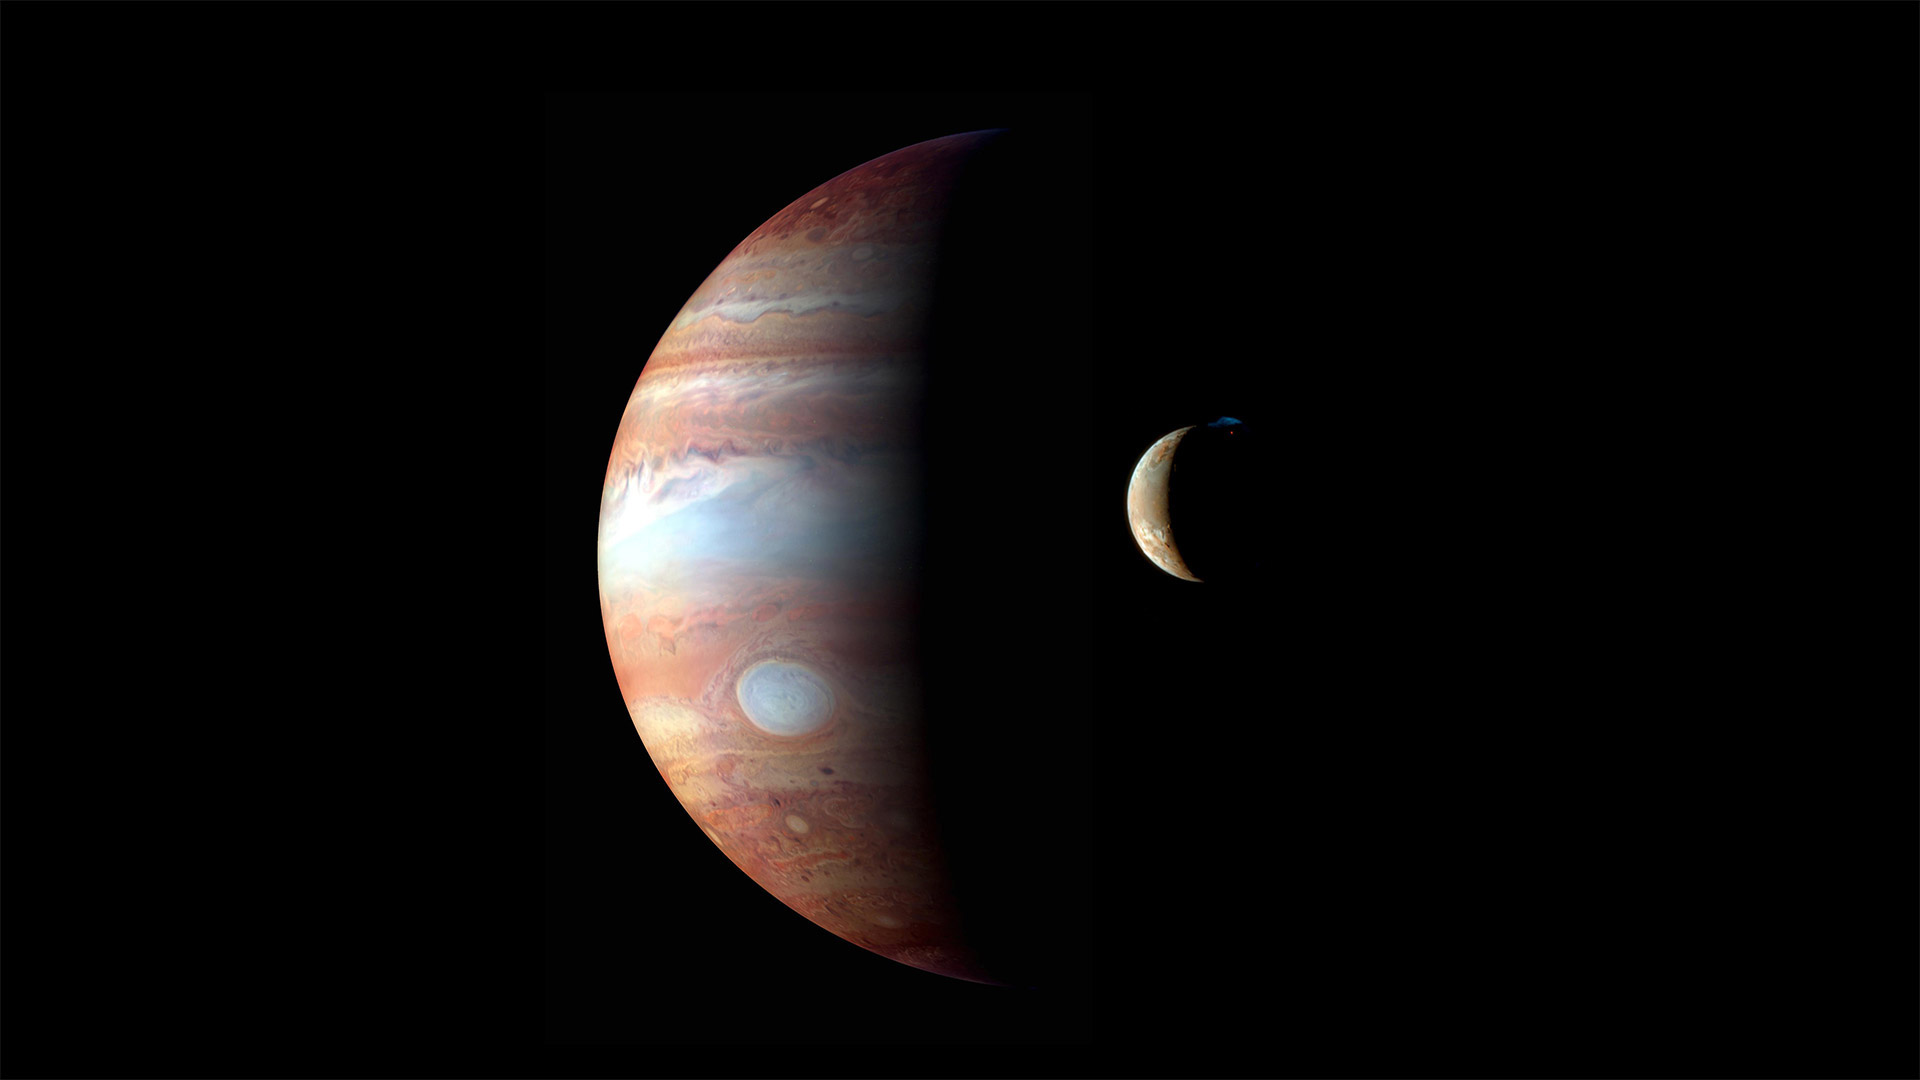 Montage of images of Jupiter and its volcanic moon Io - NASA/Johns Hopkins University Applied Physics Laboratory/Southwest Research Institute/Goddard Space Flight Center)